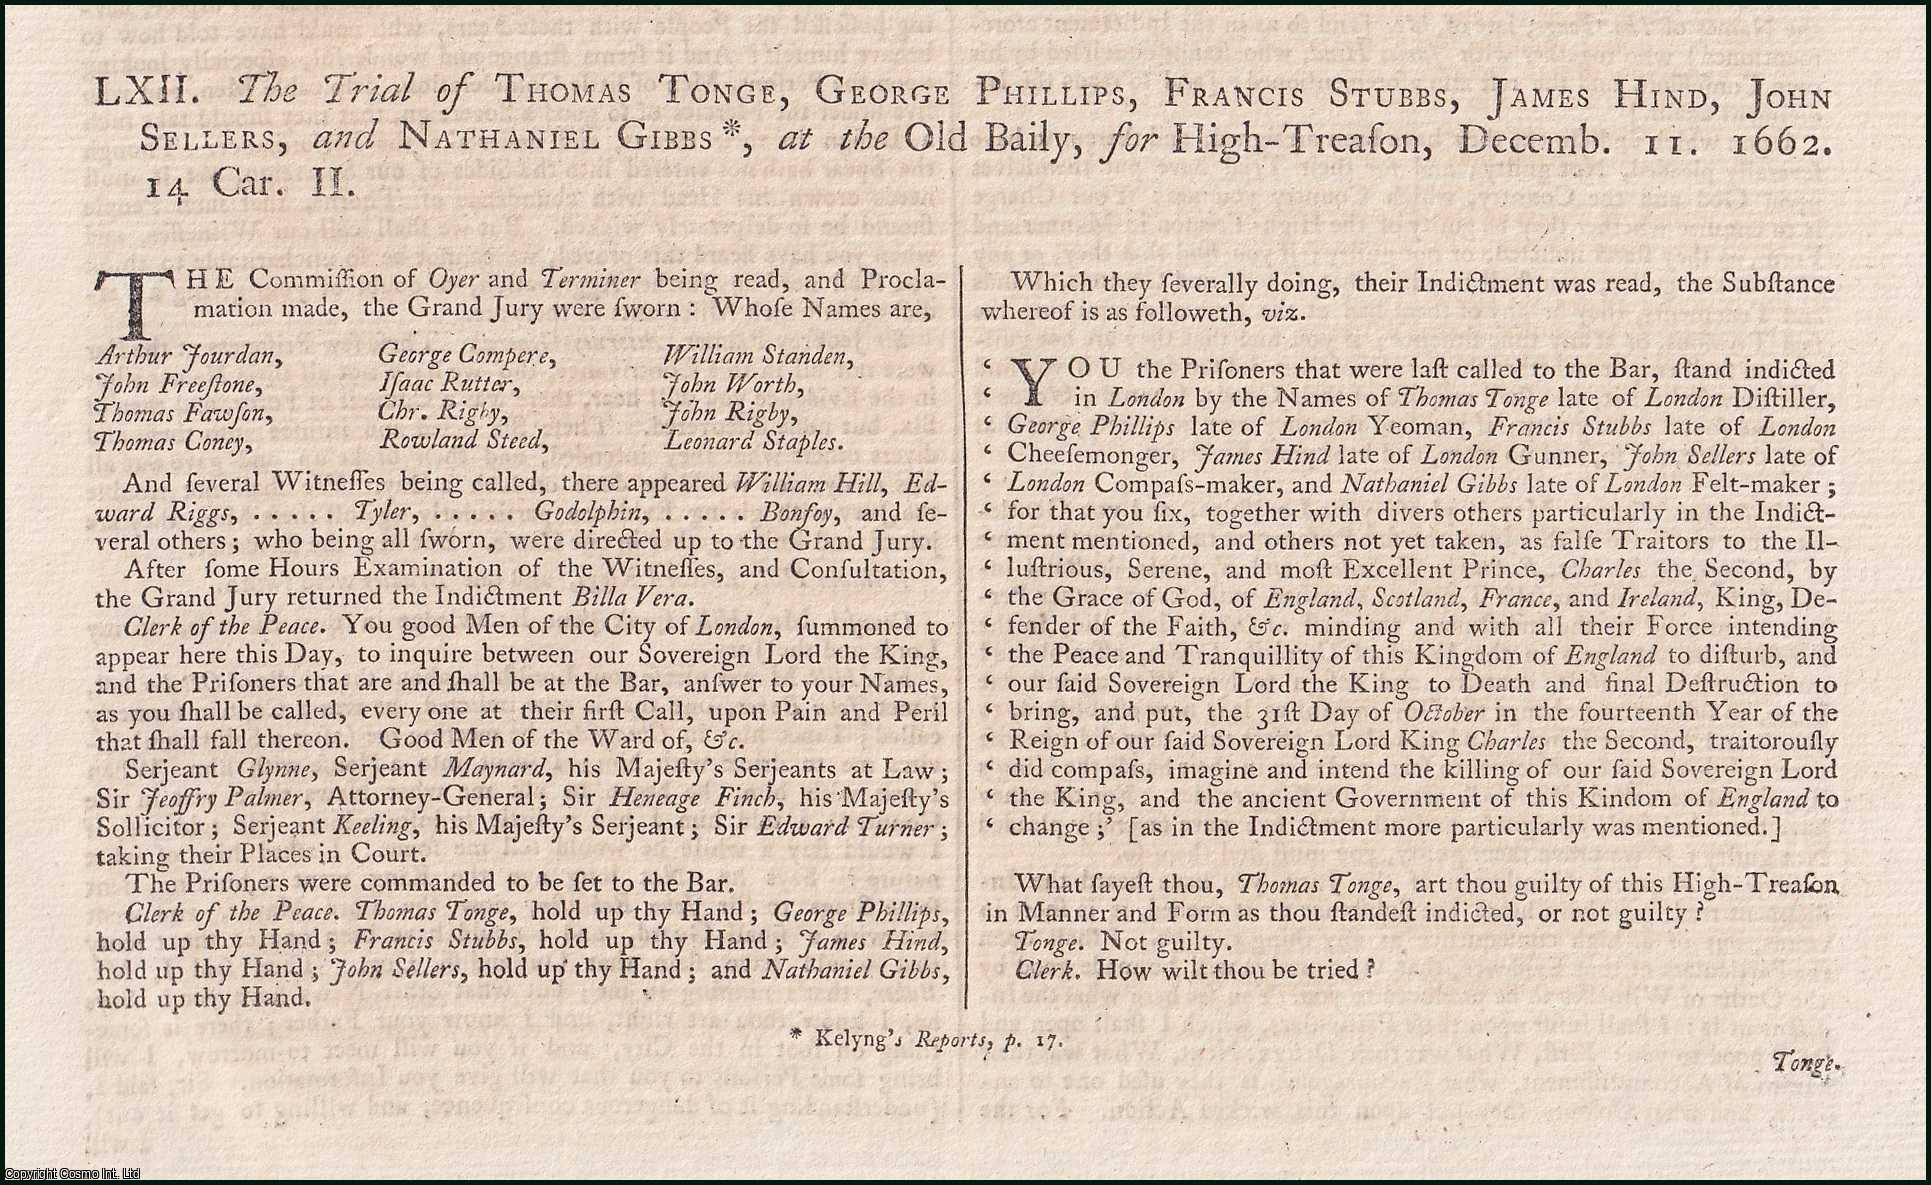 [Trial]. - The Trial of Thomas Tonge, George Phillips, Francis Stubbs, James Hind, John Sellers, and Nathaniel Gibbs, at the Old Baily, for High-Treason, December. 11. 1662. An original report from the Collected State Trials.